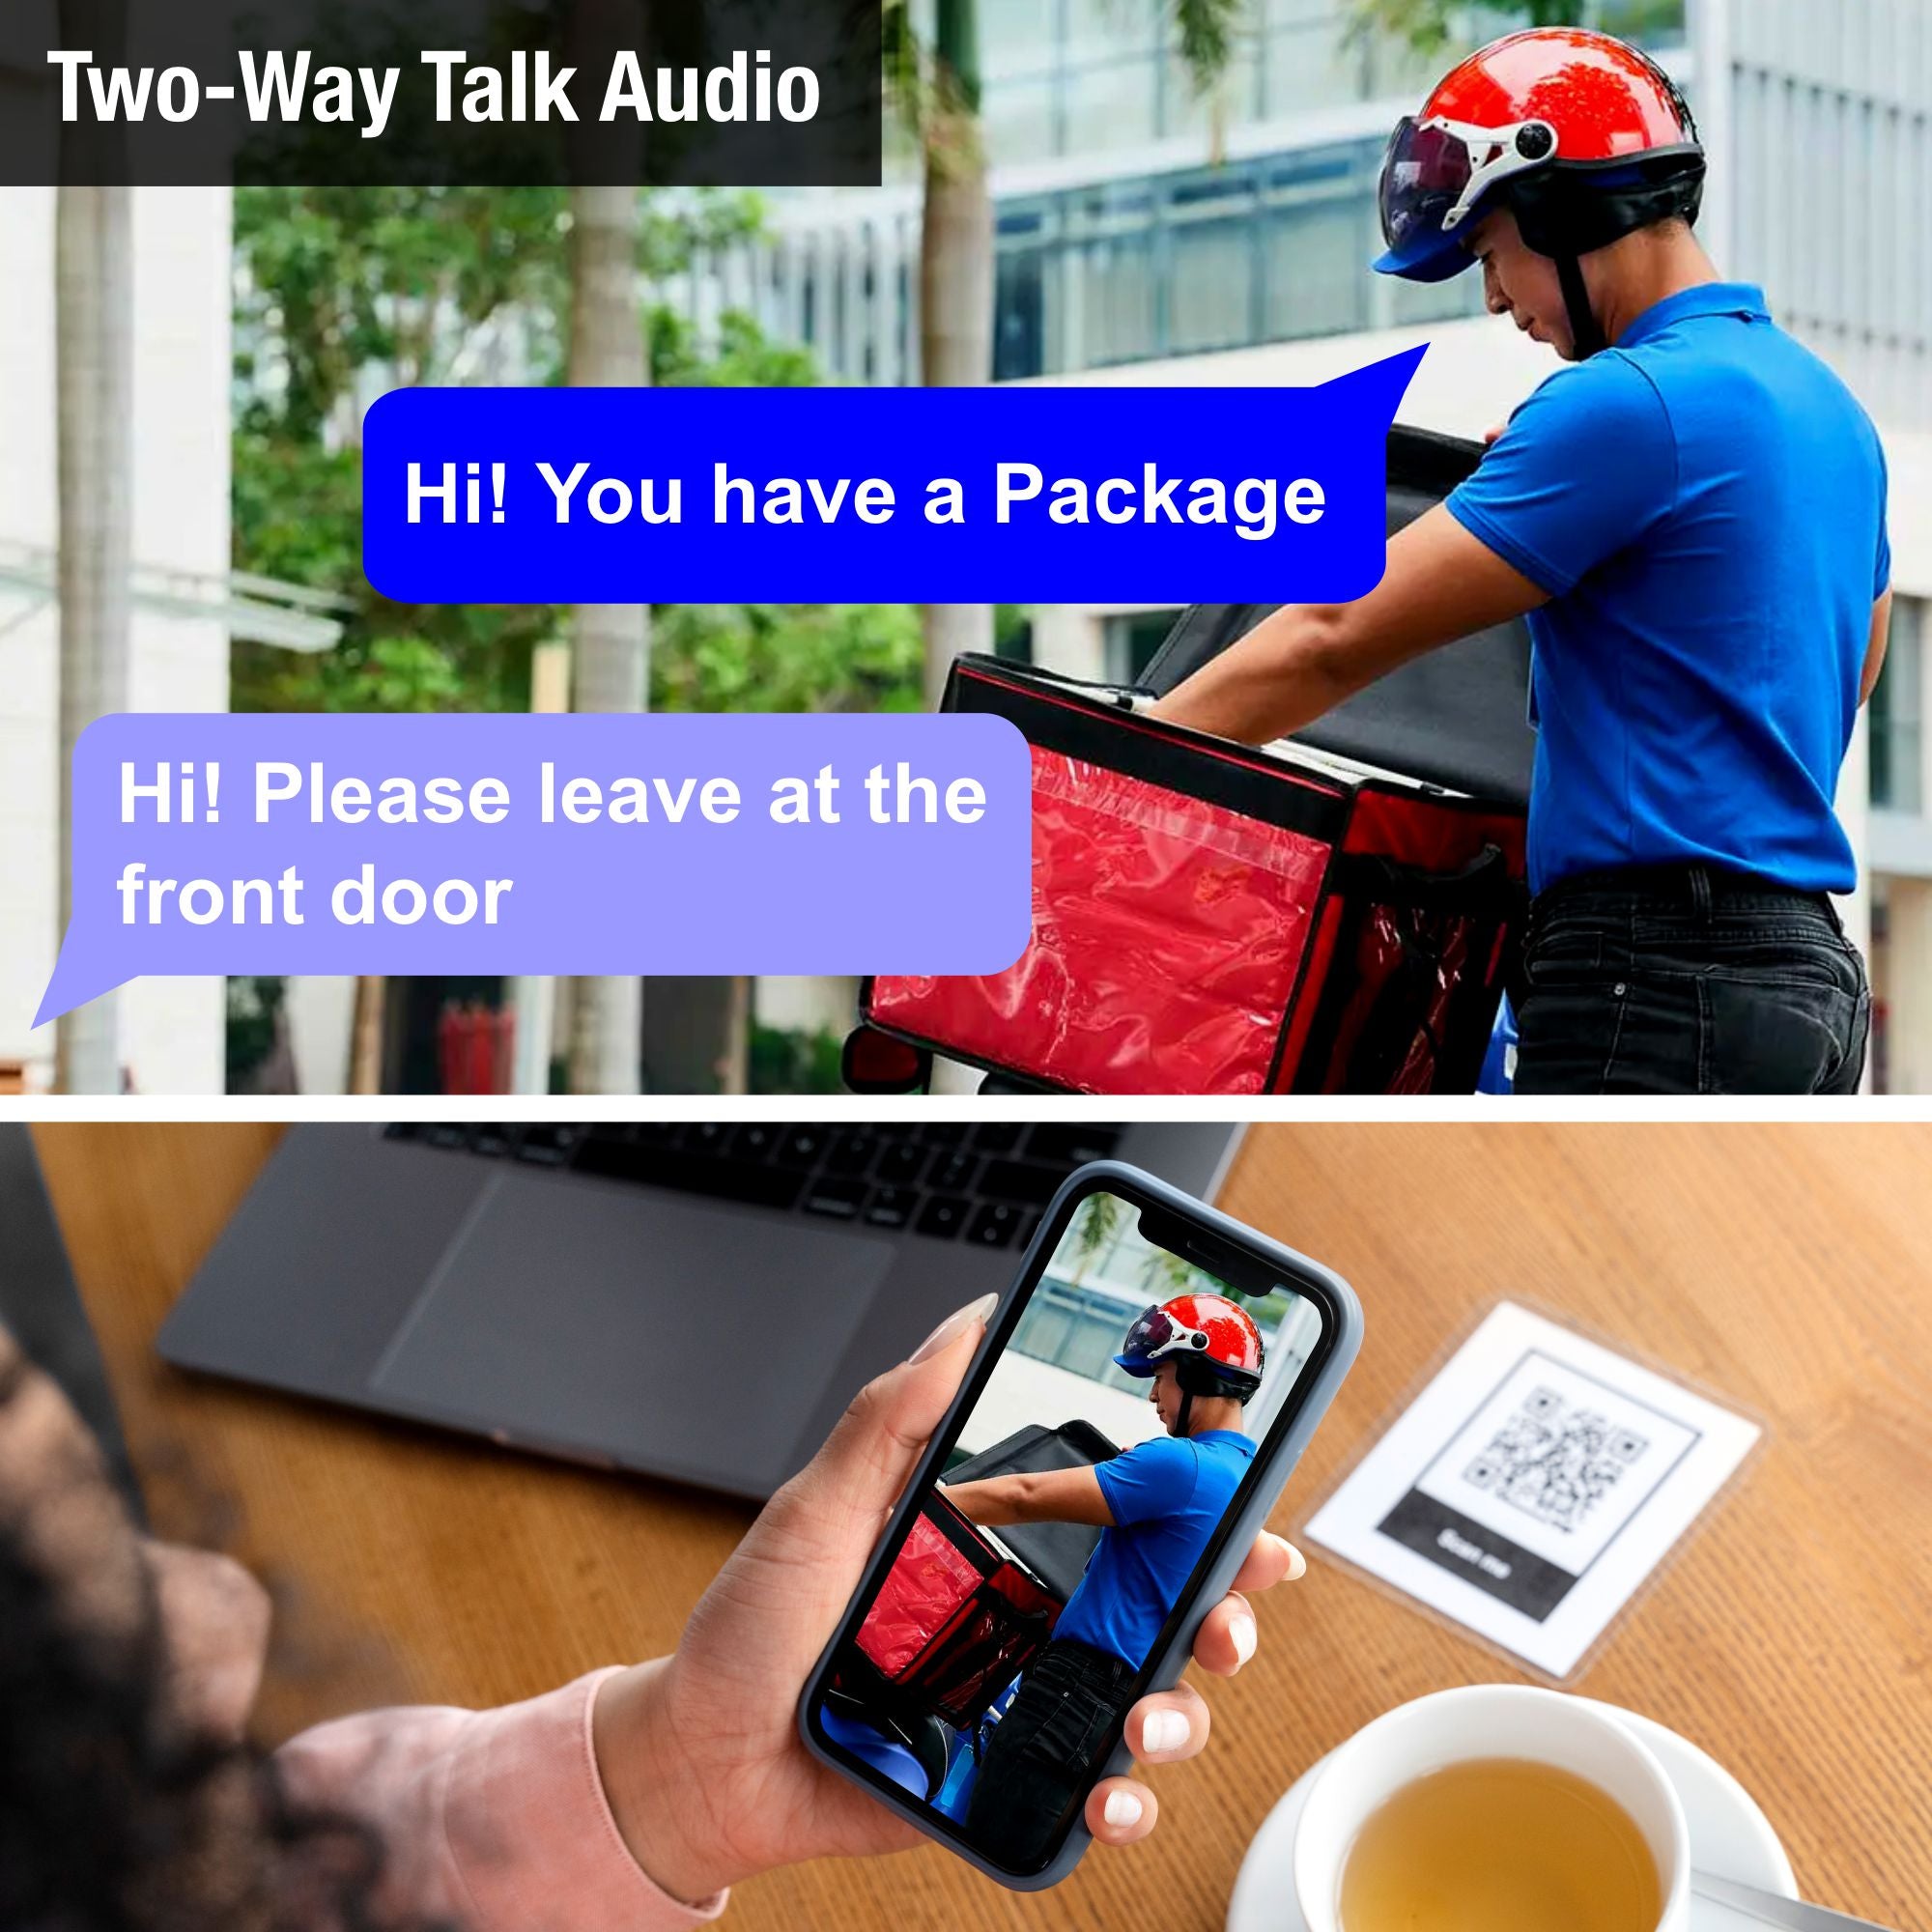 Security Cameras with Two-Way Audio Talk and Speaker